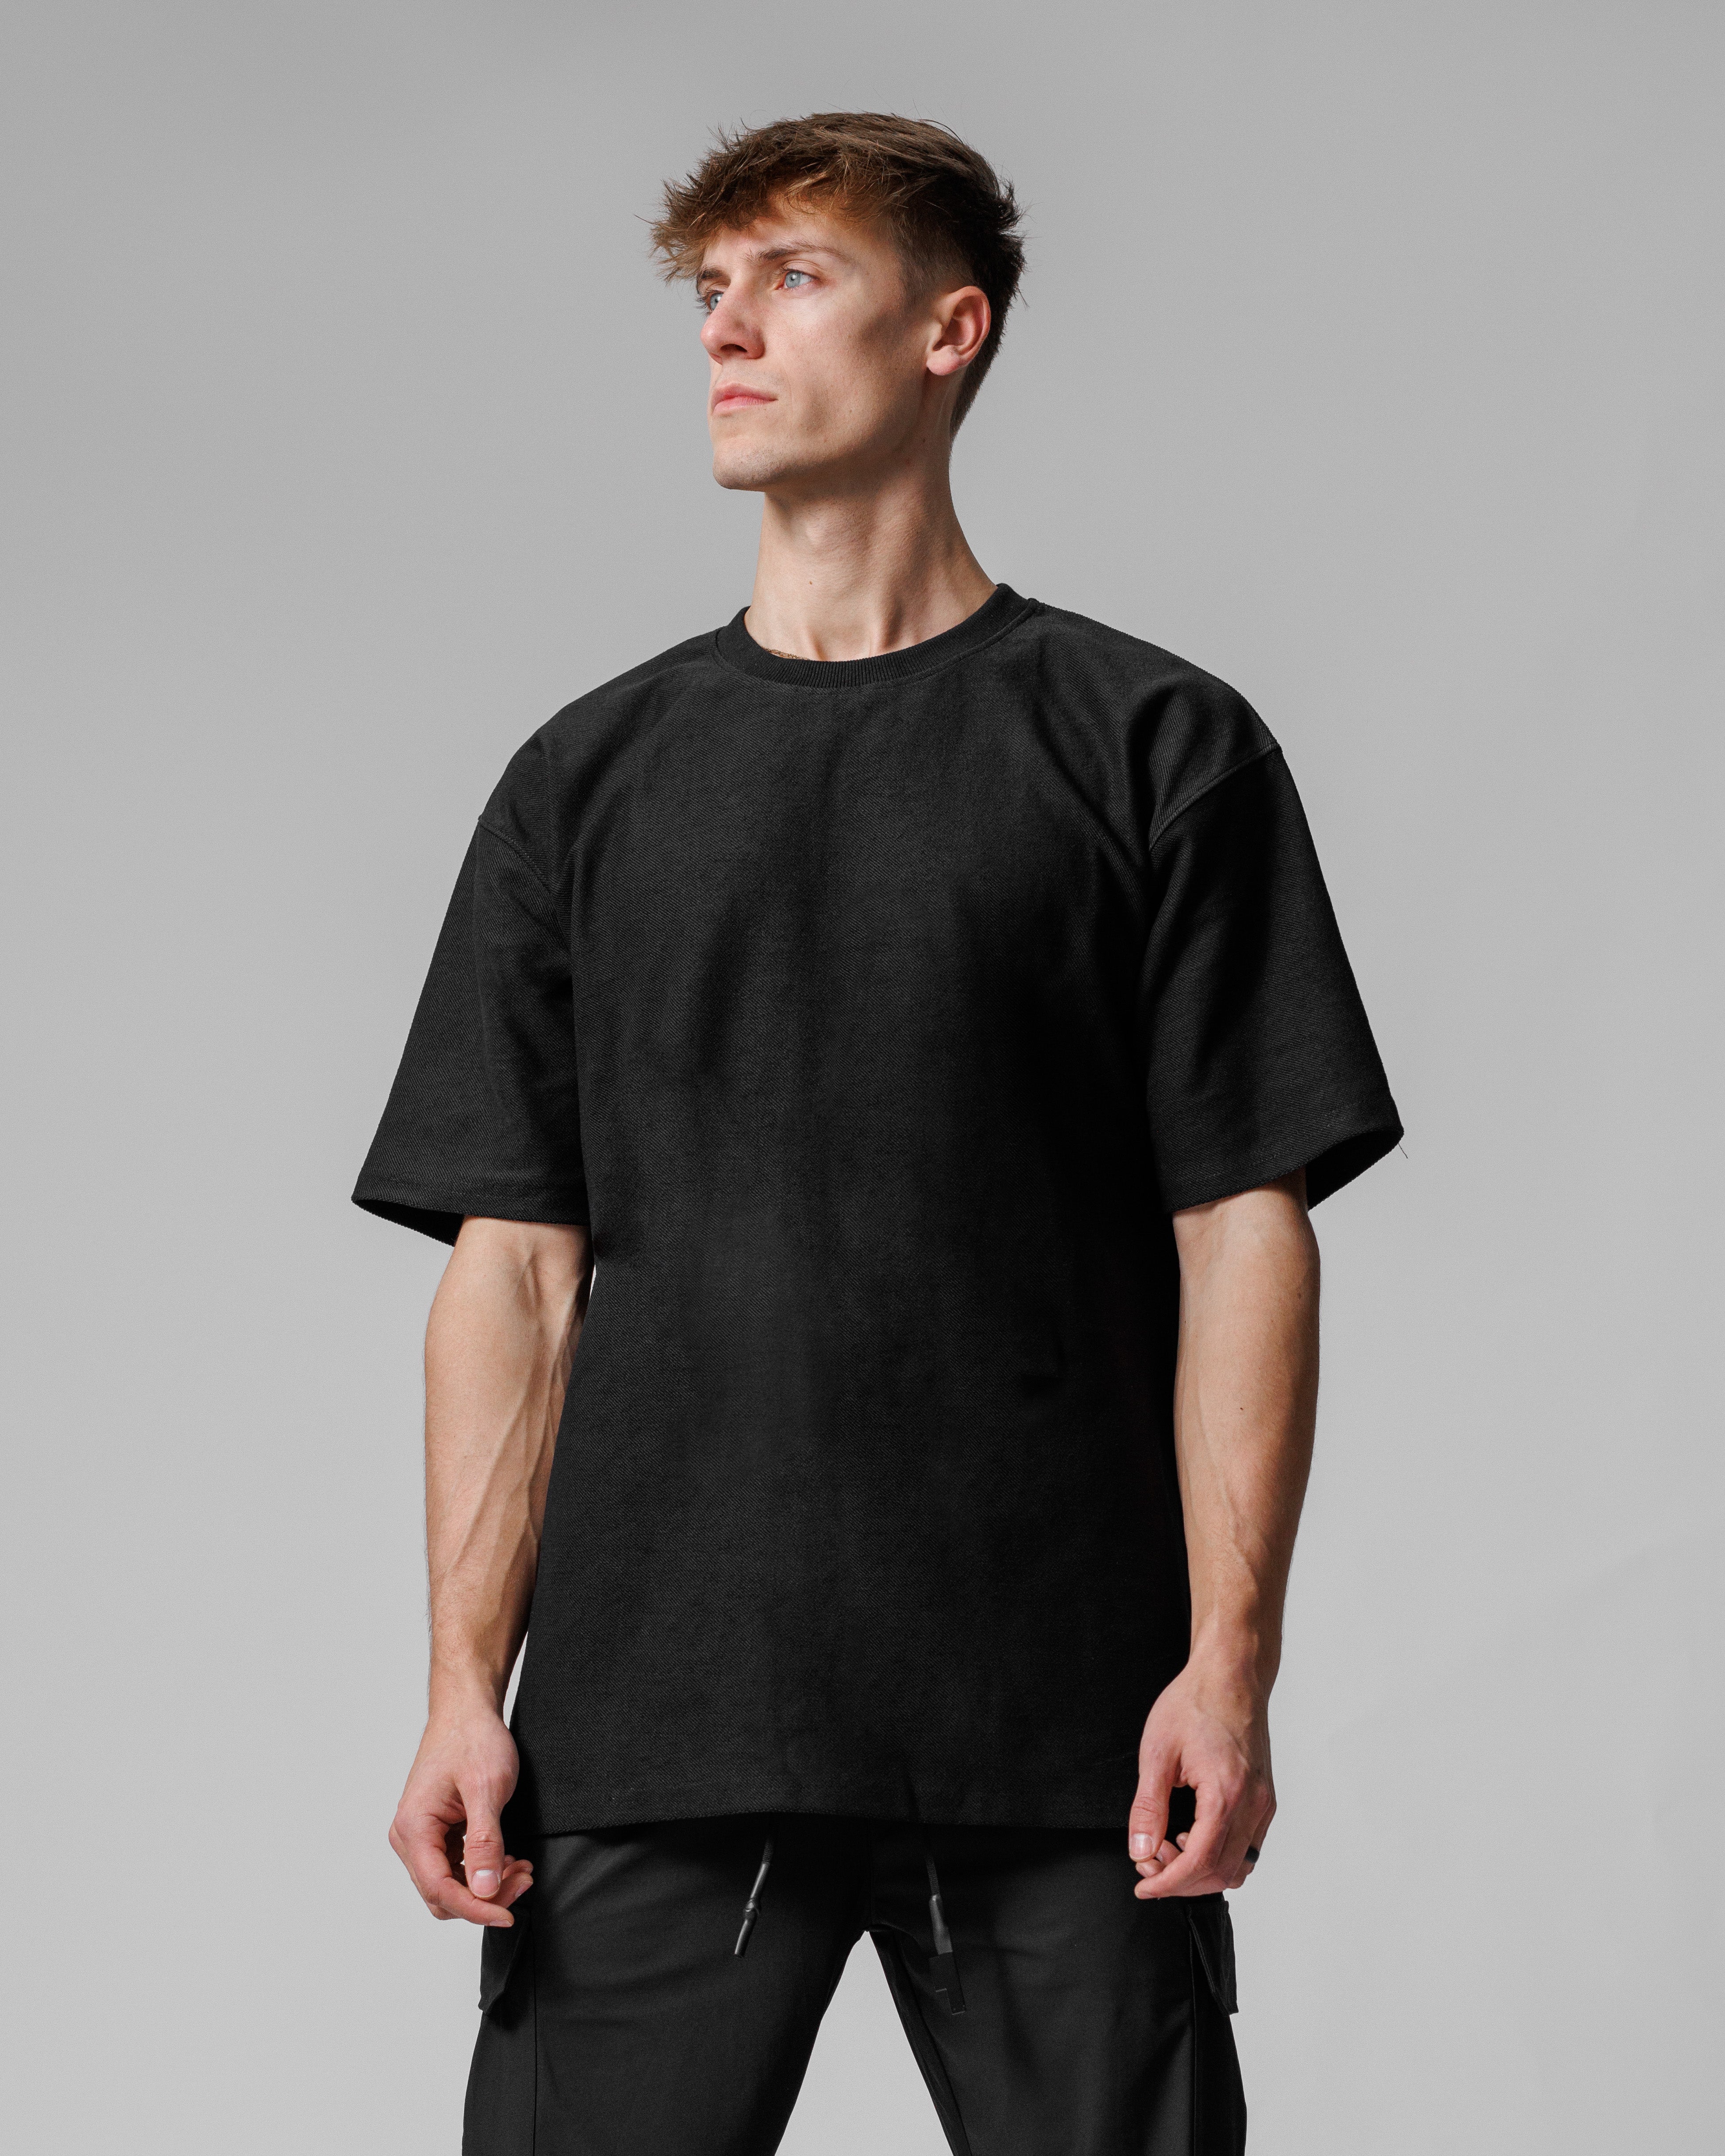 Rough-Knit Oversized Tee